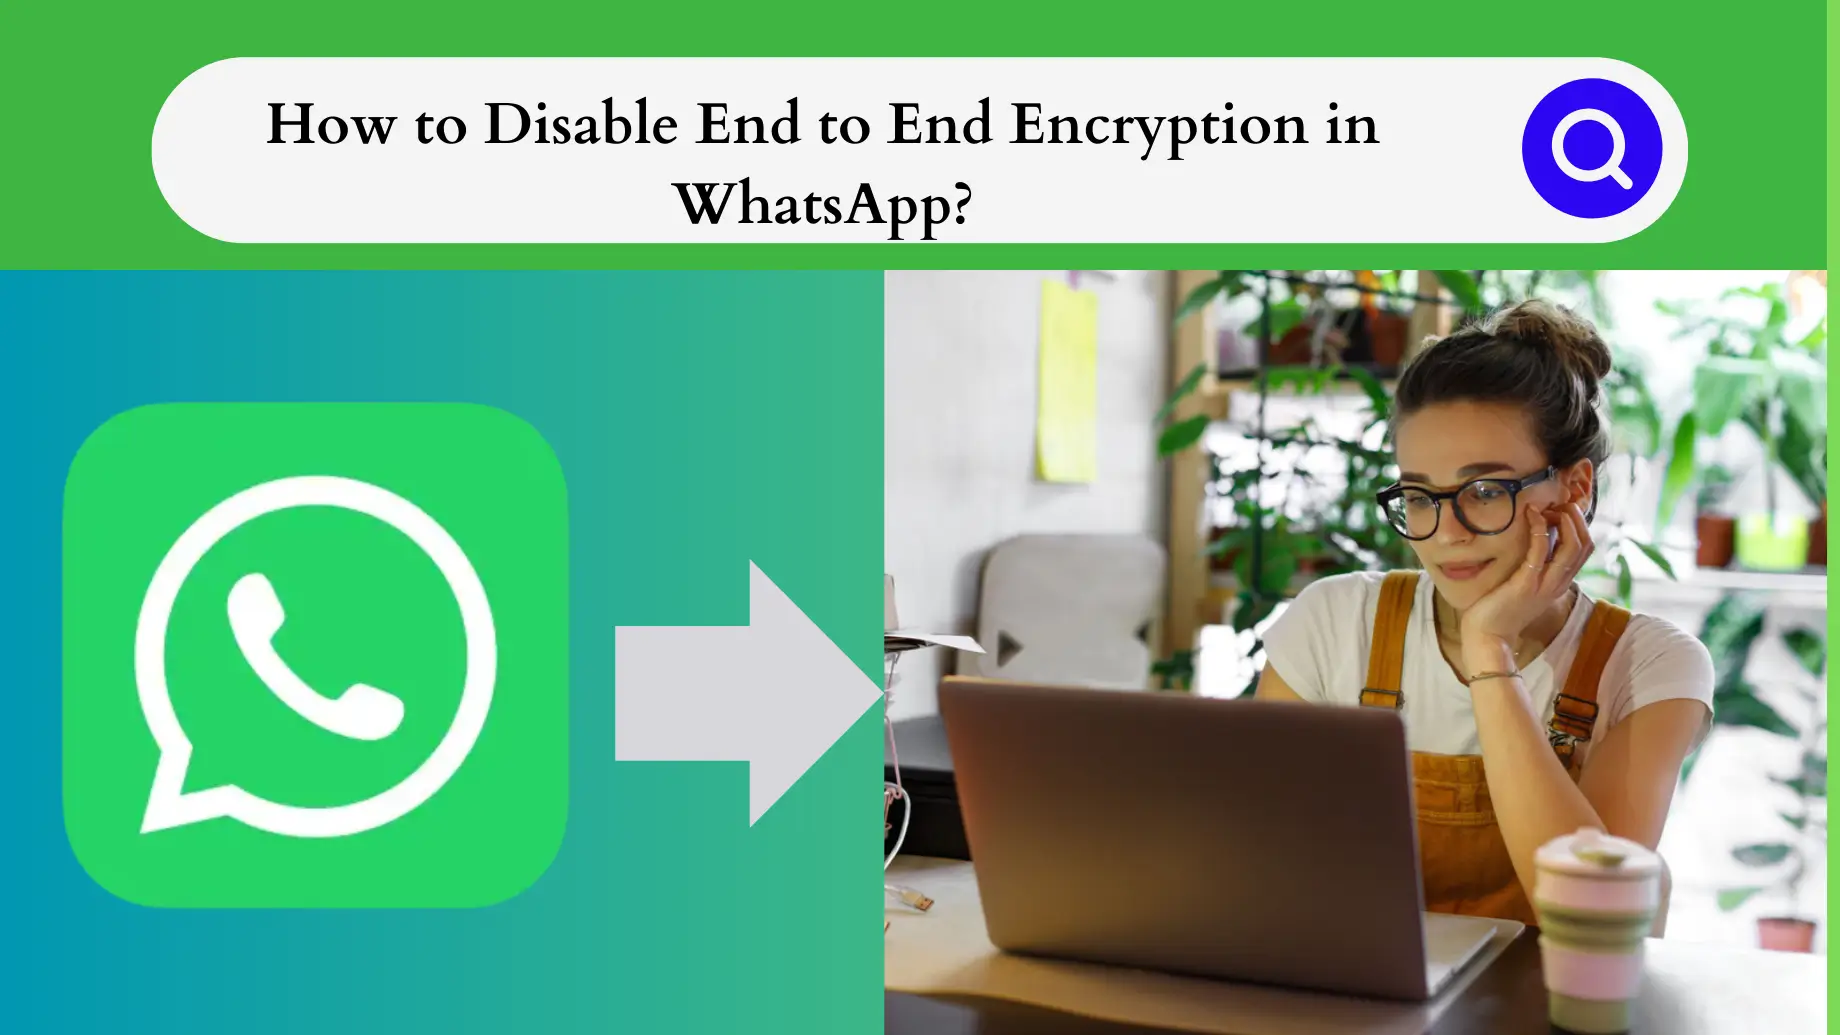 How to Disable End to End Encryption in WhatsApp